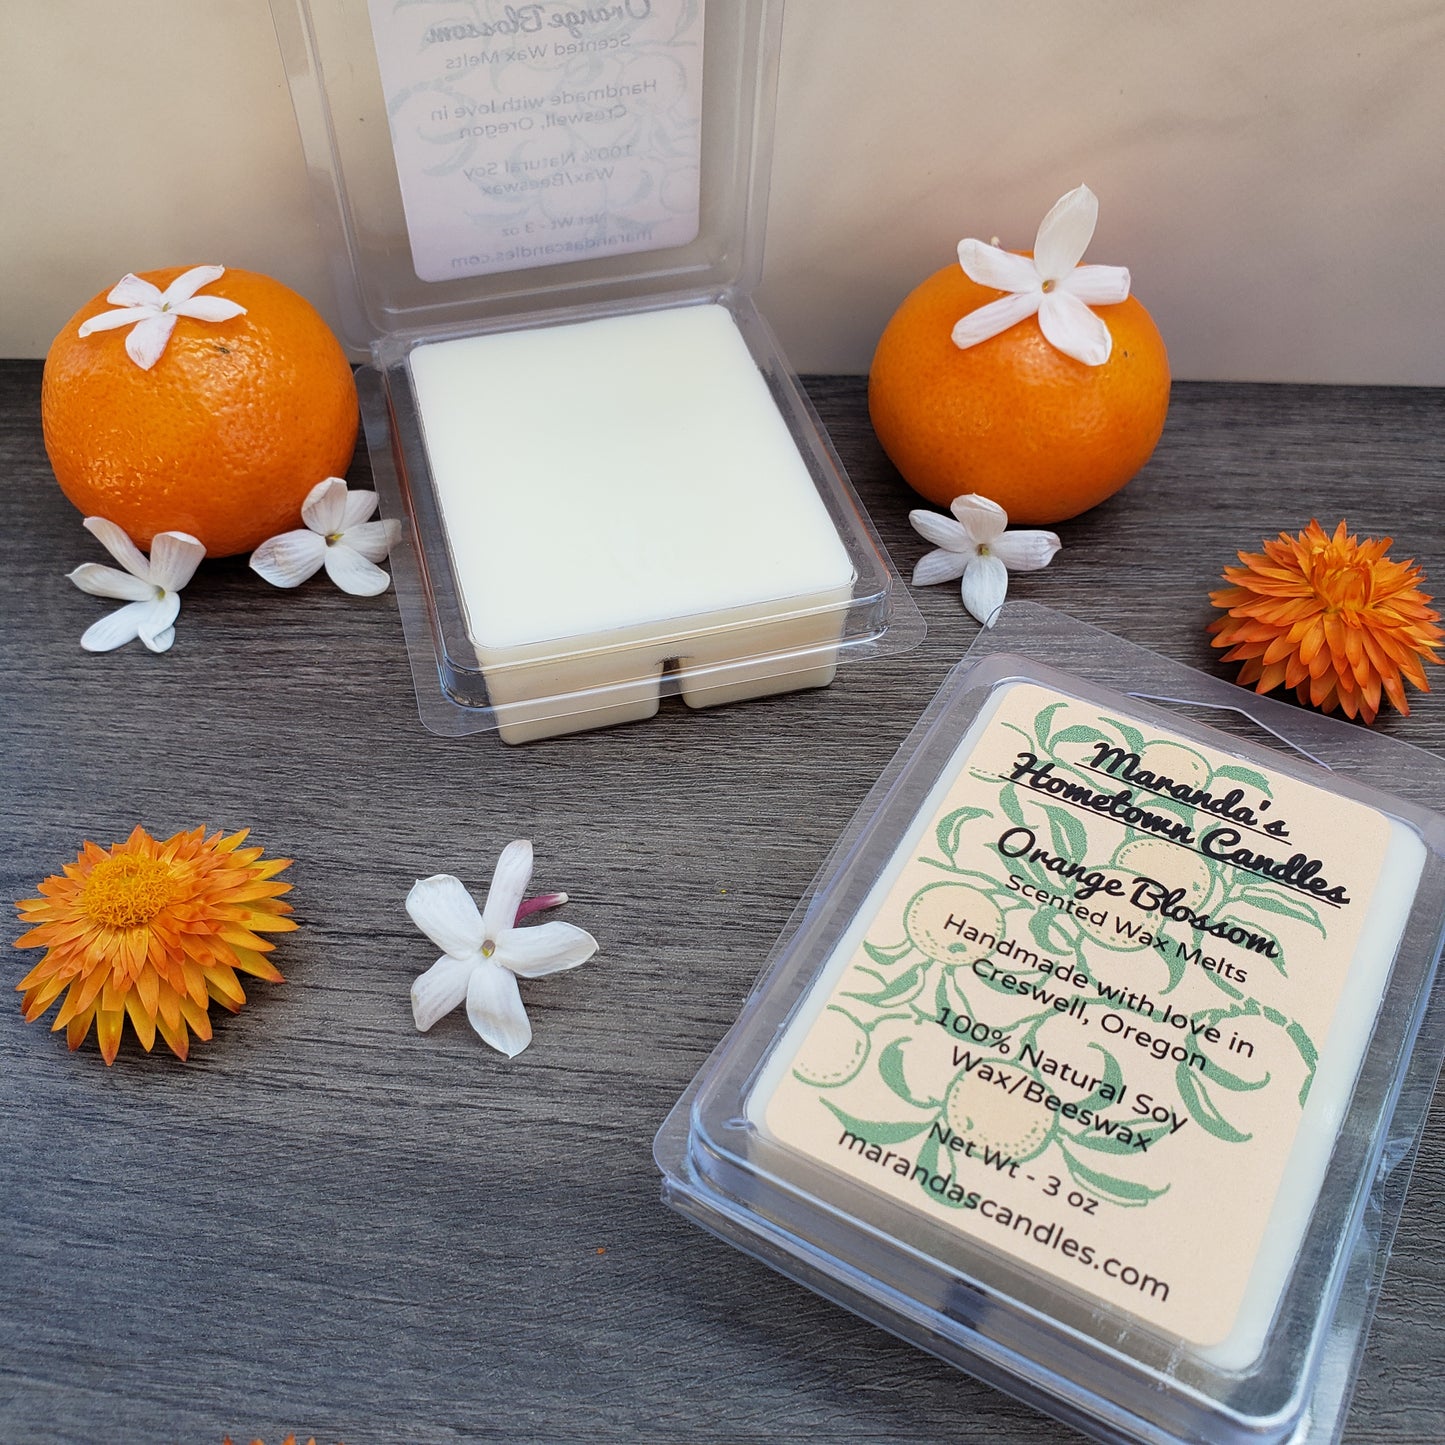 Orange Blossom Scented Soy Wax Candles and Wax Melts